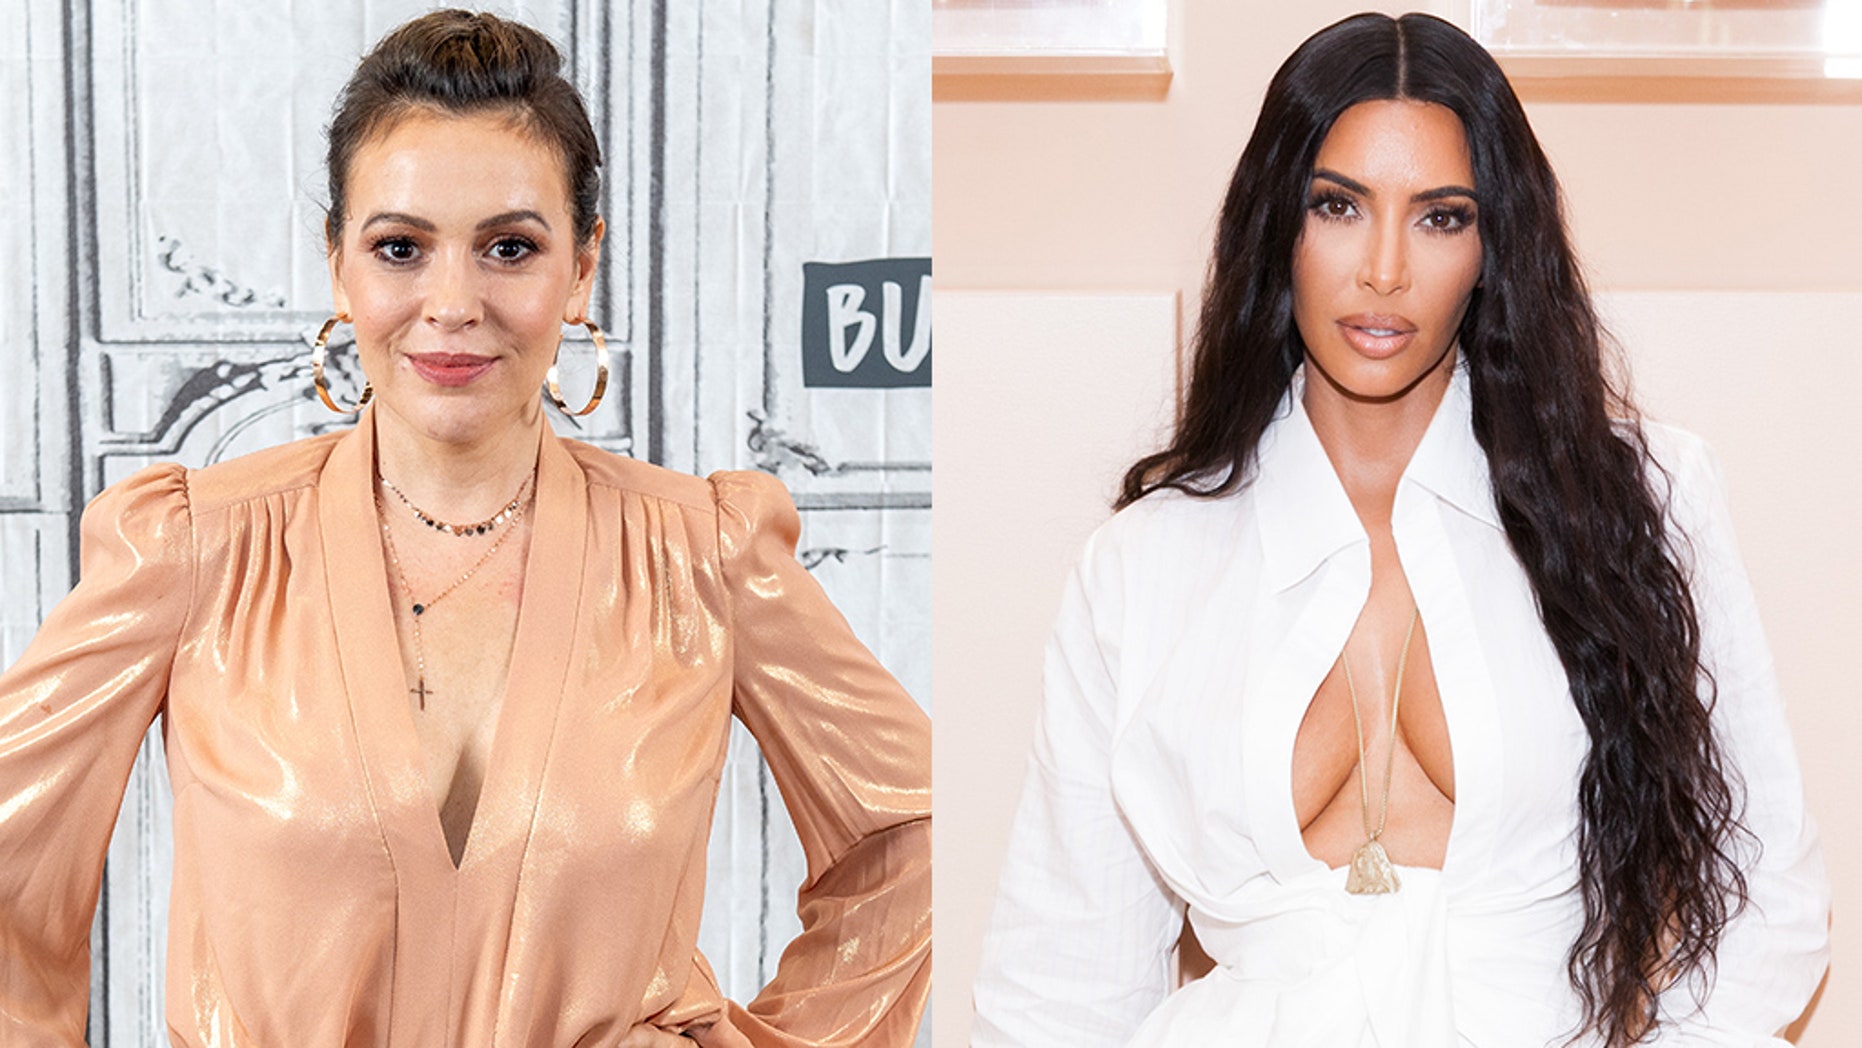 Alyssa Milano, Kim Kardashian and other stars had to evacuate their homes in Southern California because of the Woolsey fire.